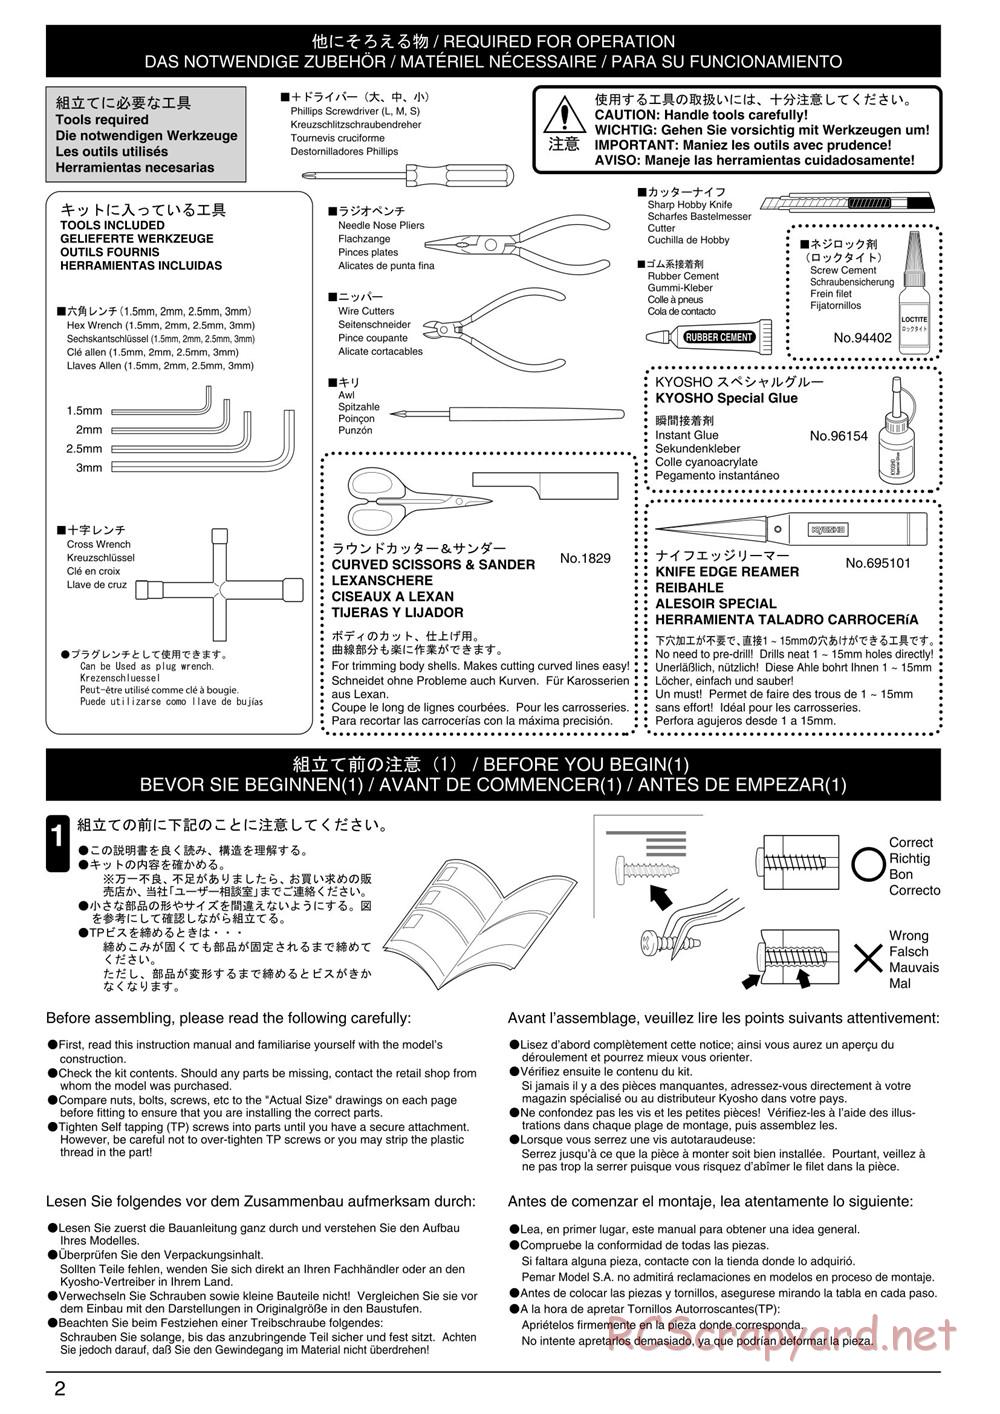 Kyosho - Inferno ST (2005) - Manual - Page 2